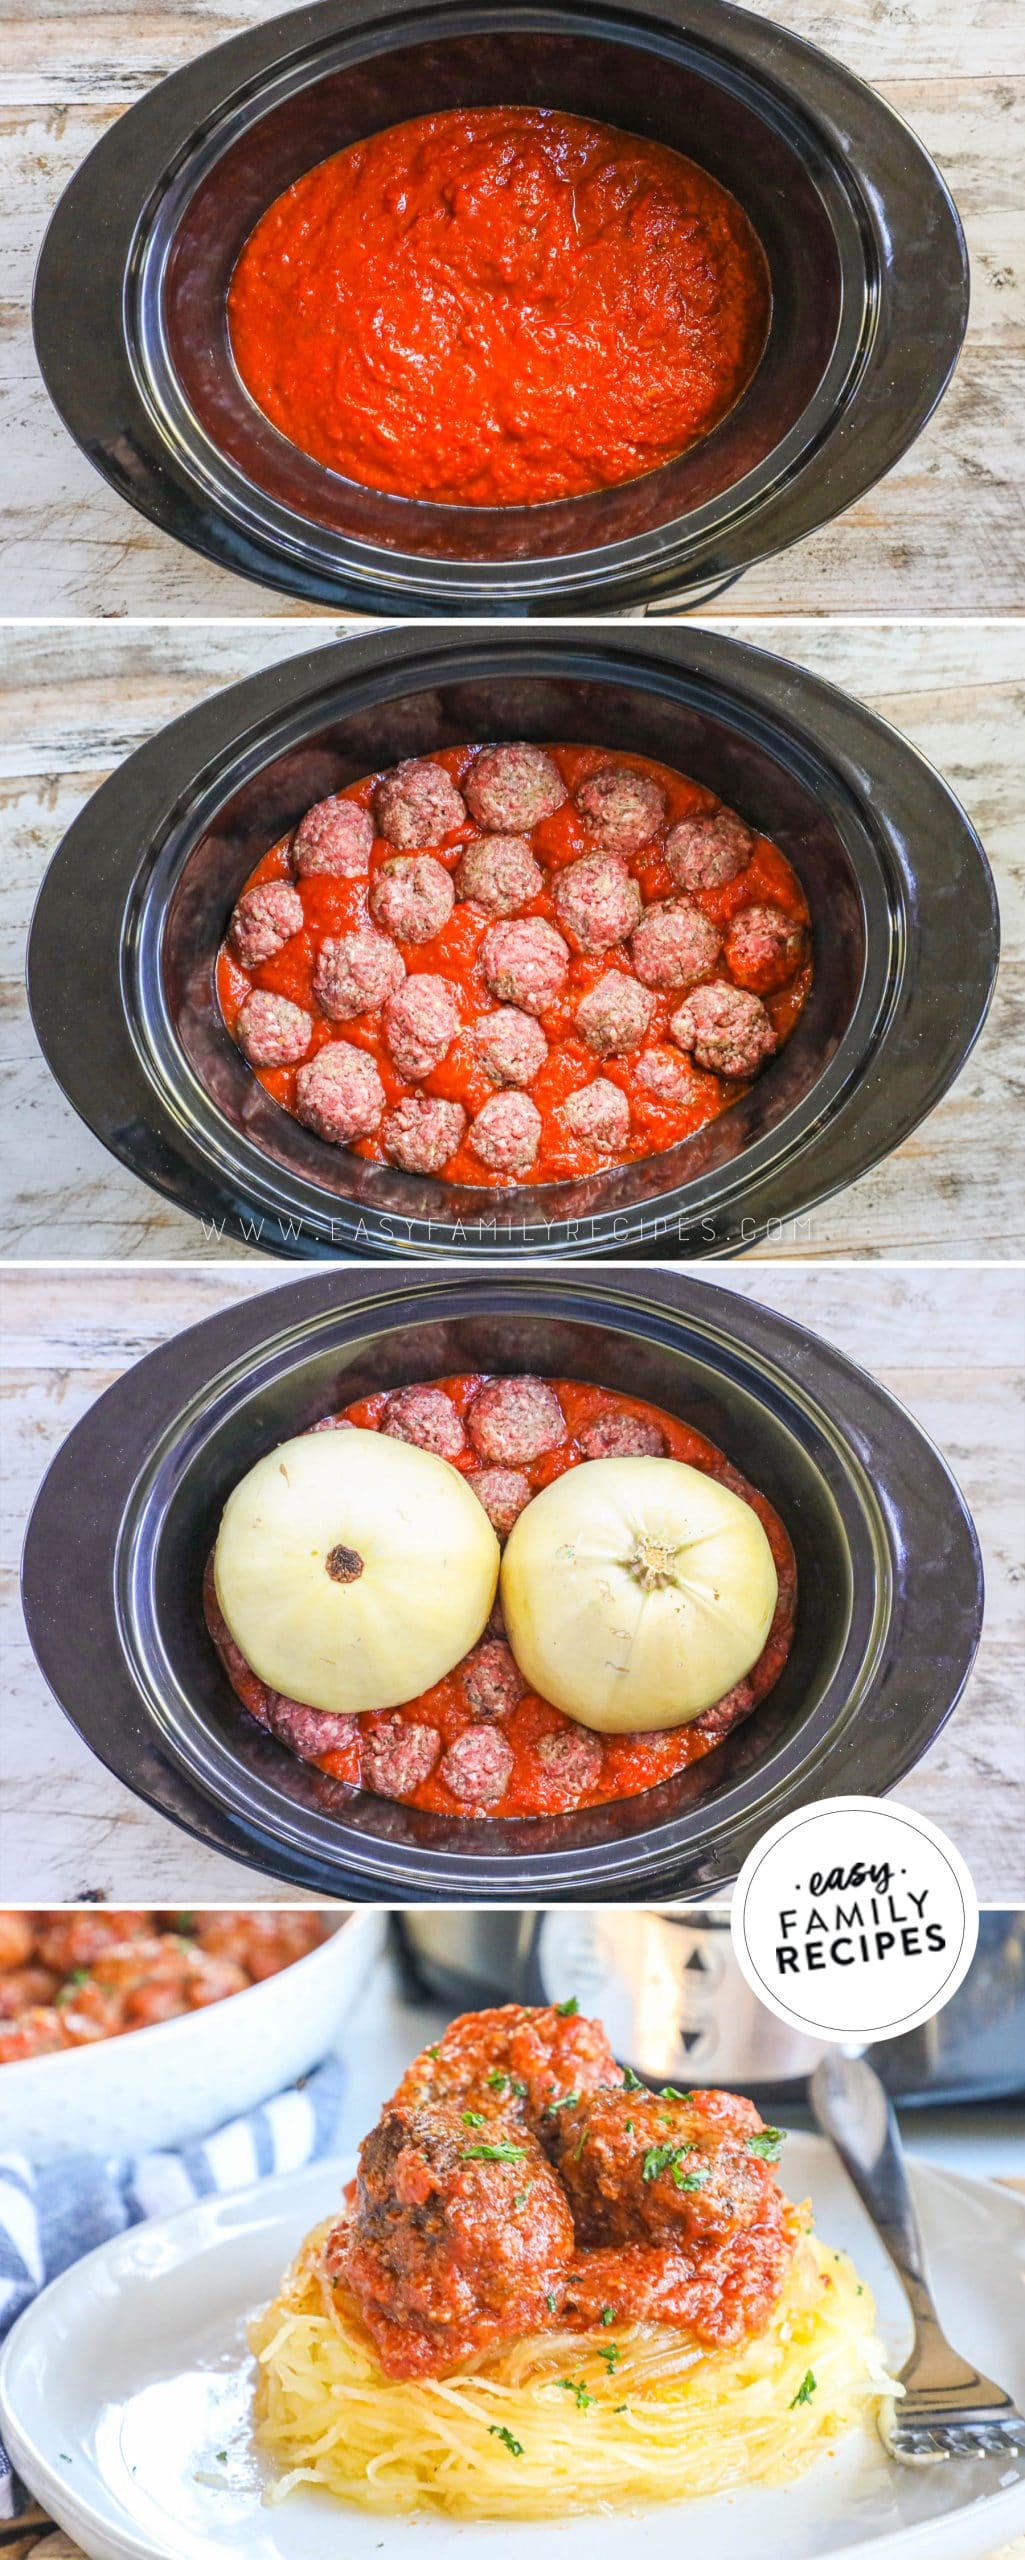 How to Make slow cooker spaghetti squash and meatballs- 1. Pour marinara sauce in crock pot. 2. Form meatballs and place in marinara sauce. 3. Cut spaghetti squash in half and place on top. 4. Once cooked remove strands from spaghetti squash and top with meatballs and marinara sauce.